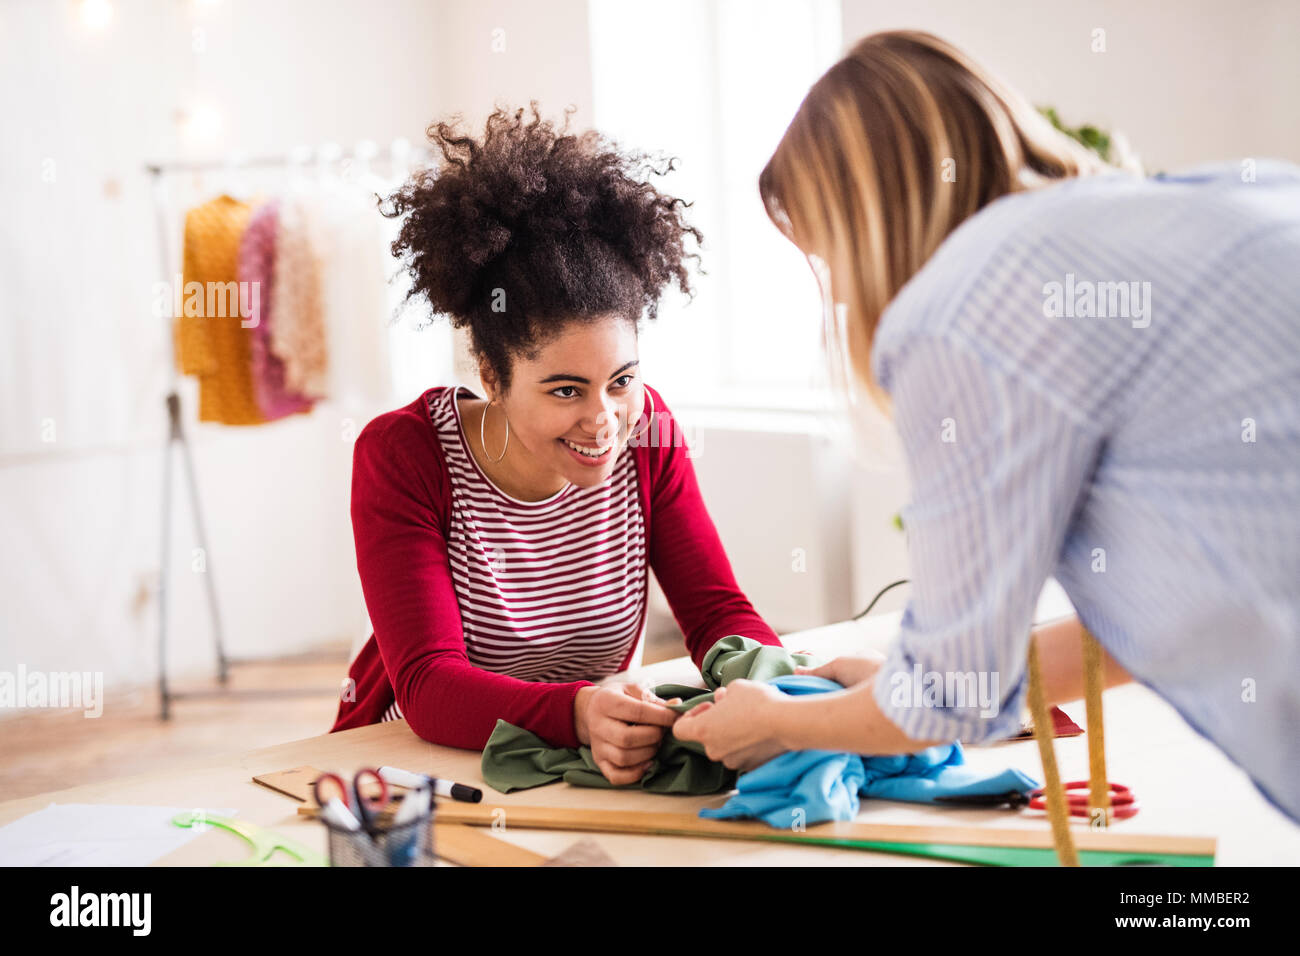 Young creative women in a studio, startup business. Stock Photo